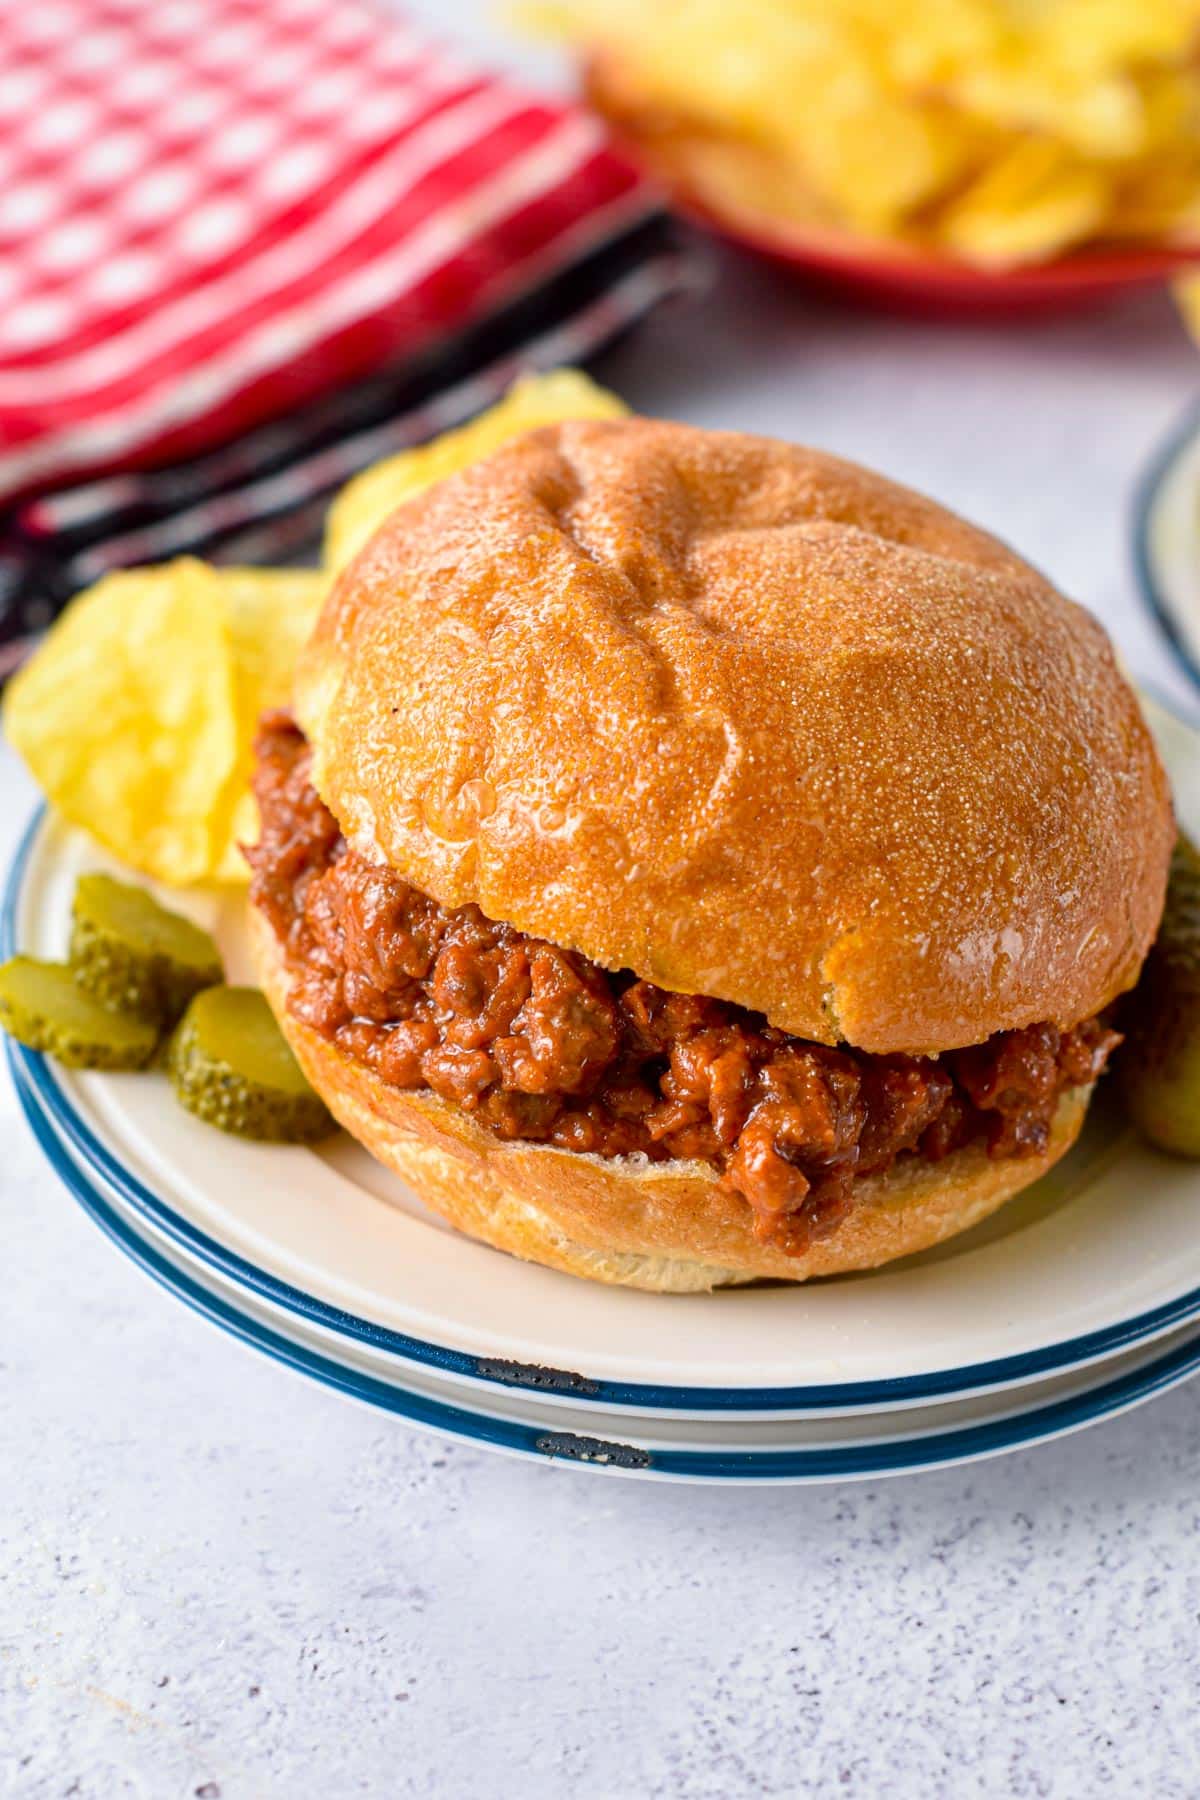 A low-carb bun filled with low-carb sloppy joe filling and gherkins on the side.